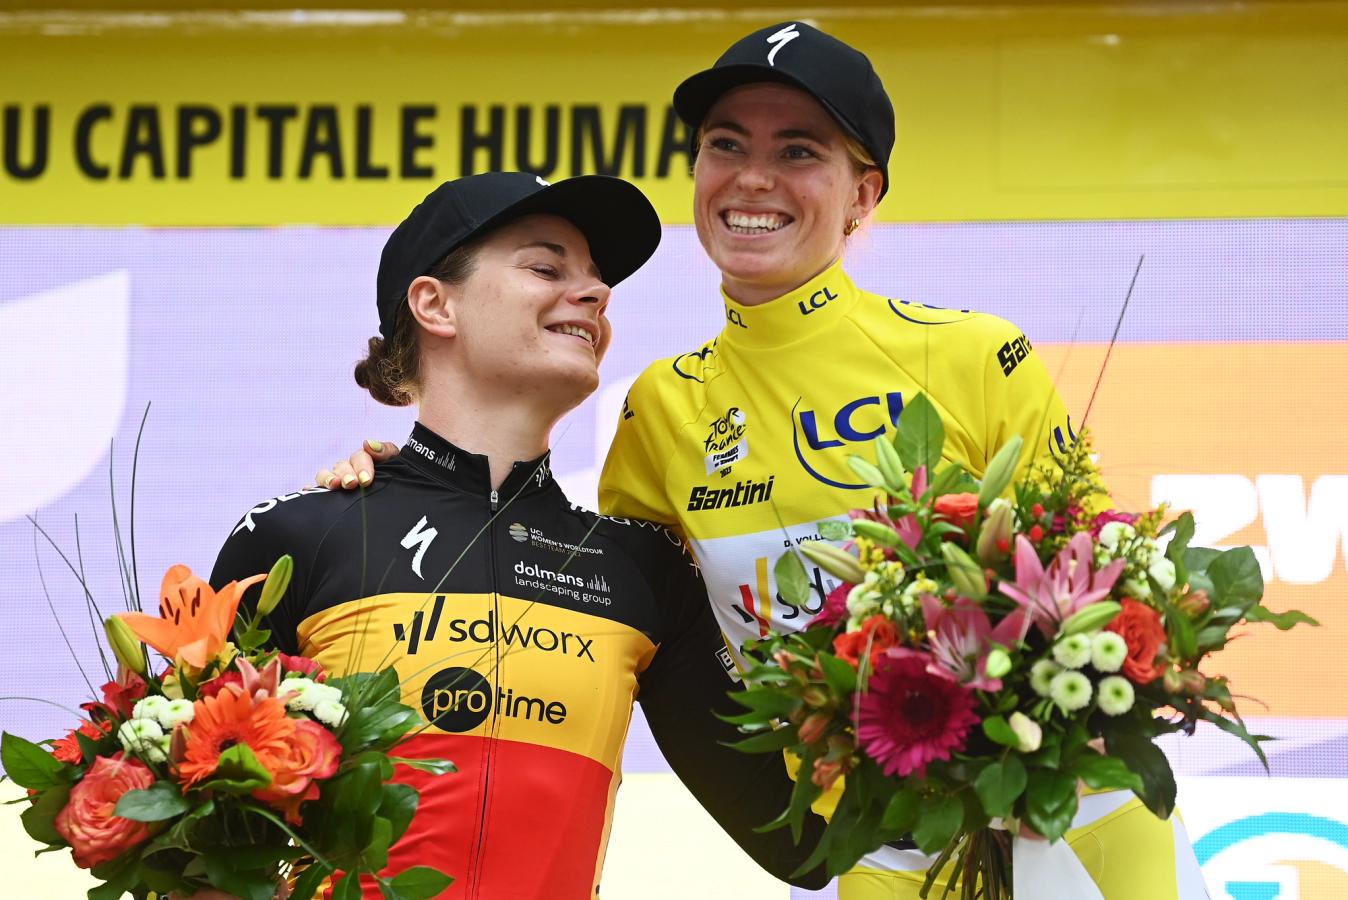 Demi Vollering and Lotte Kopecky finished first and second overall at the Tour de France Femmes